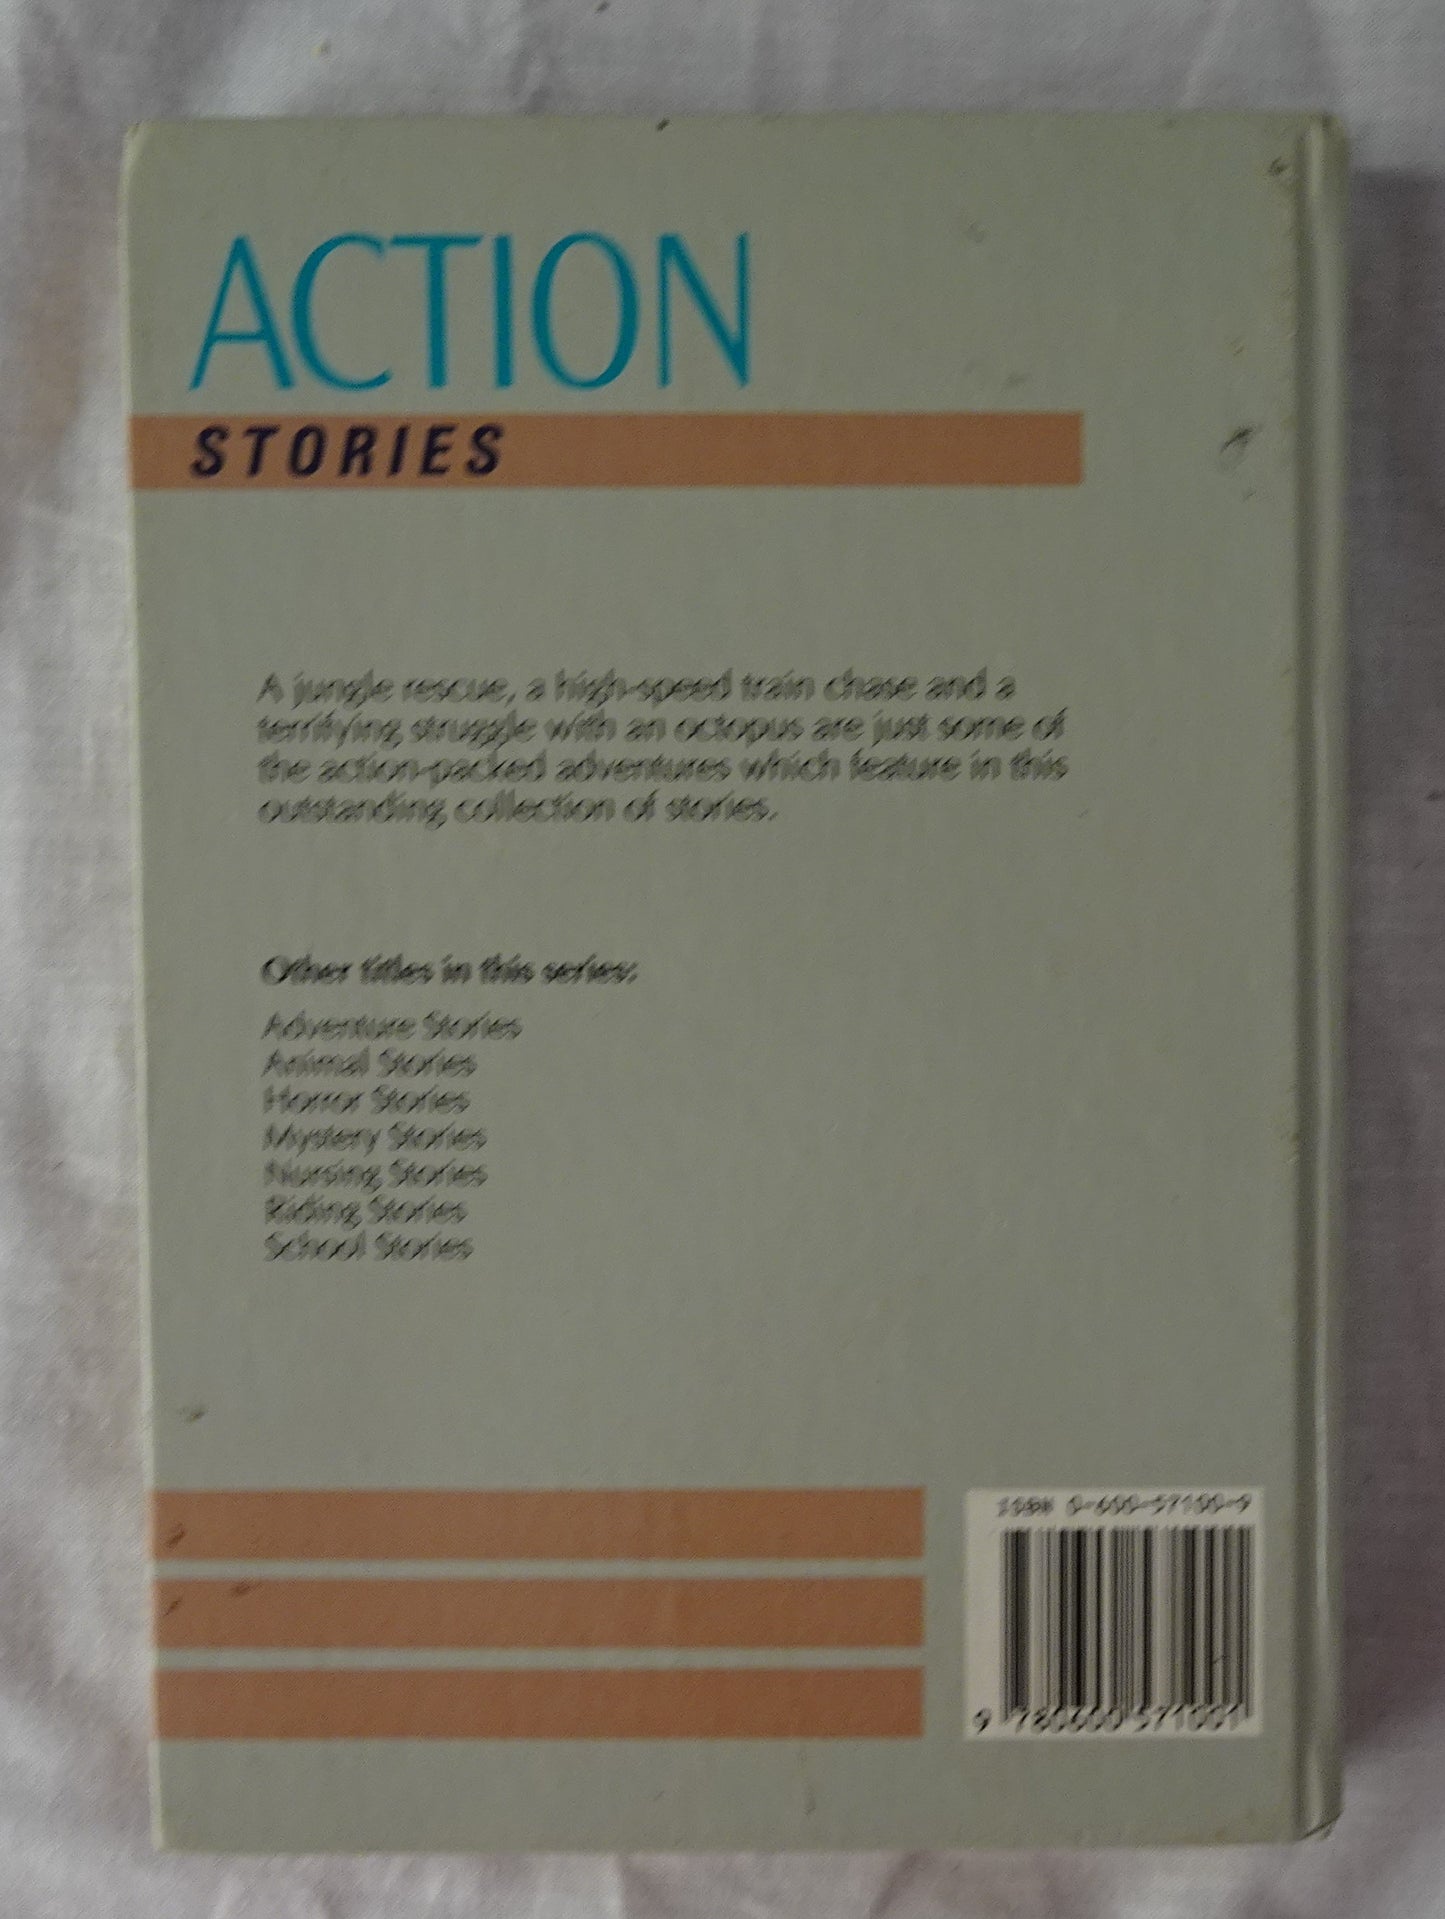 A Collection of Action Stories